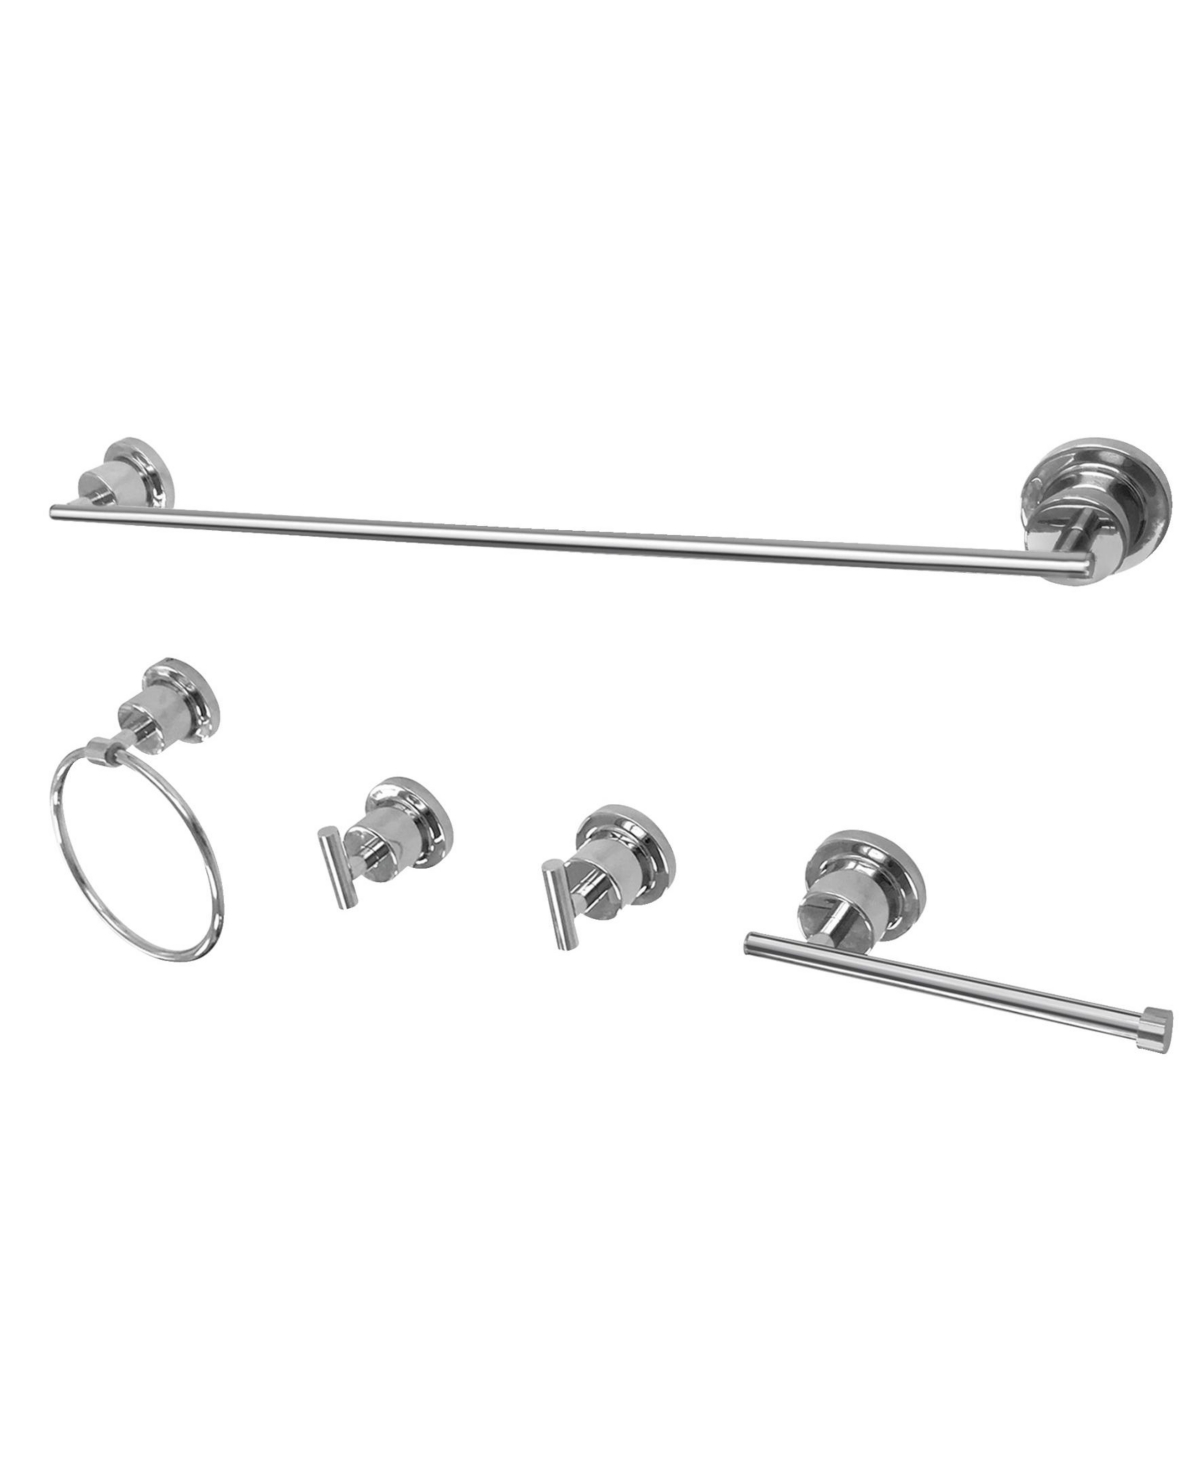 Kingston Brass Modern Concord 5-Pc. Bathroom Accessory Set in Polished Chrome Bedding